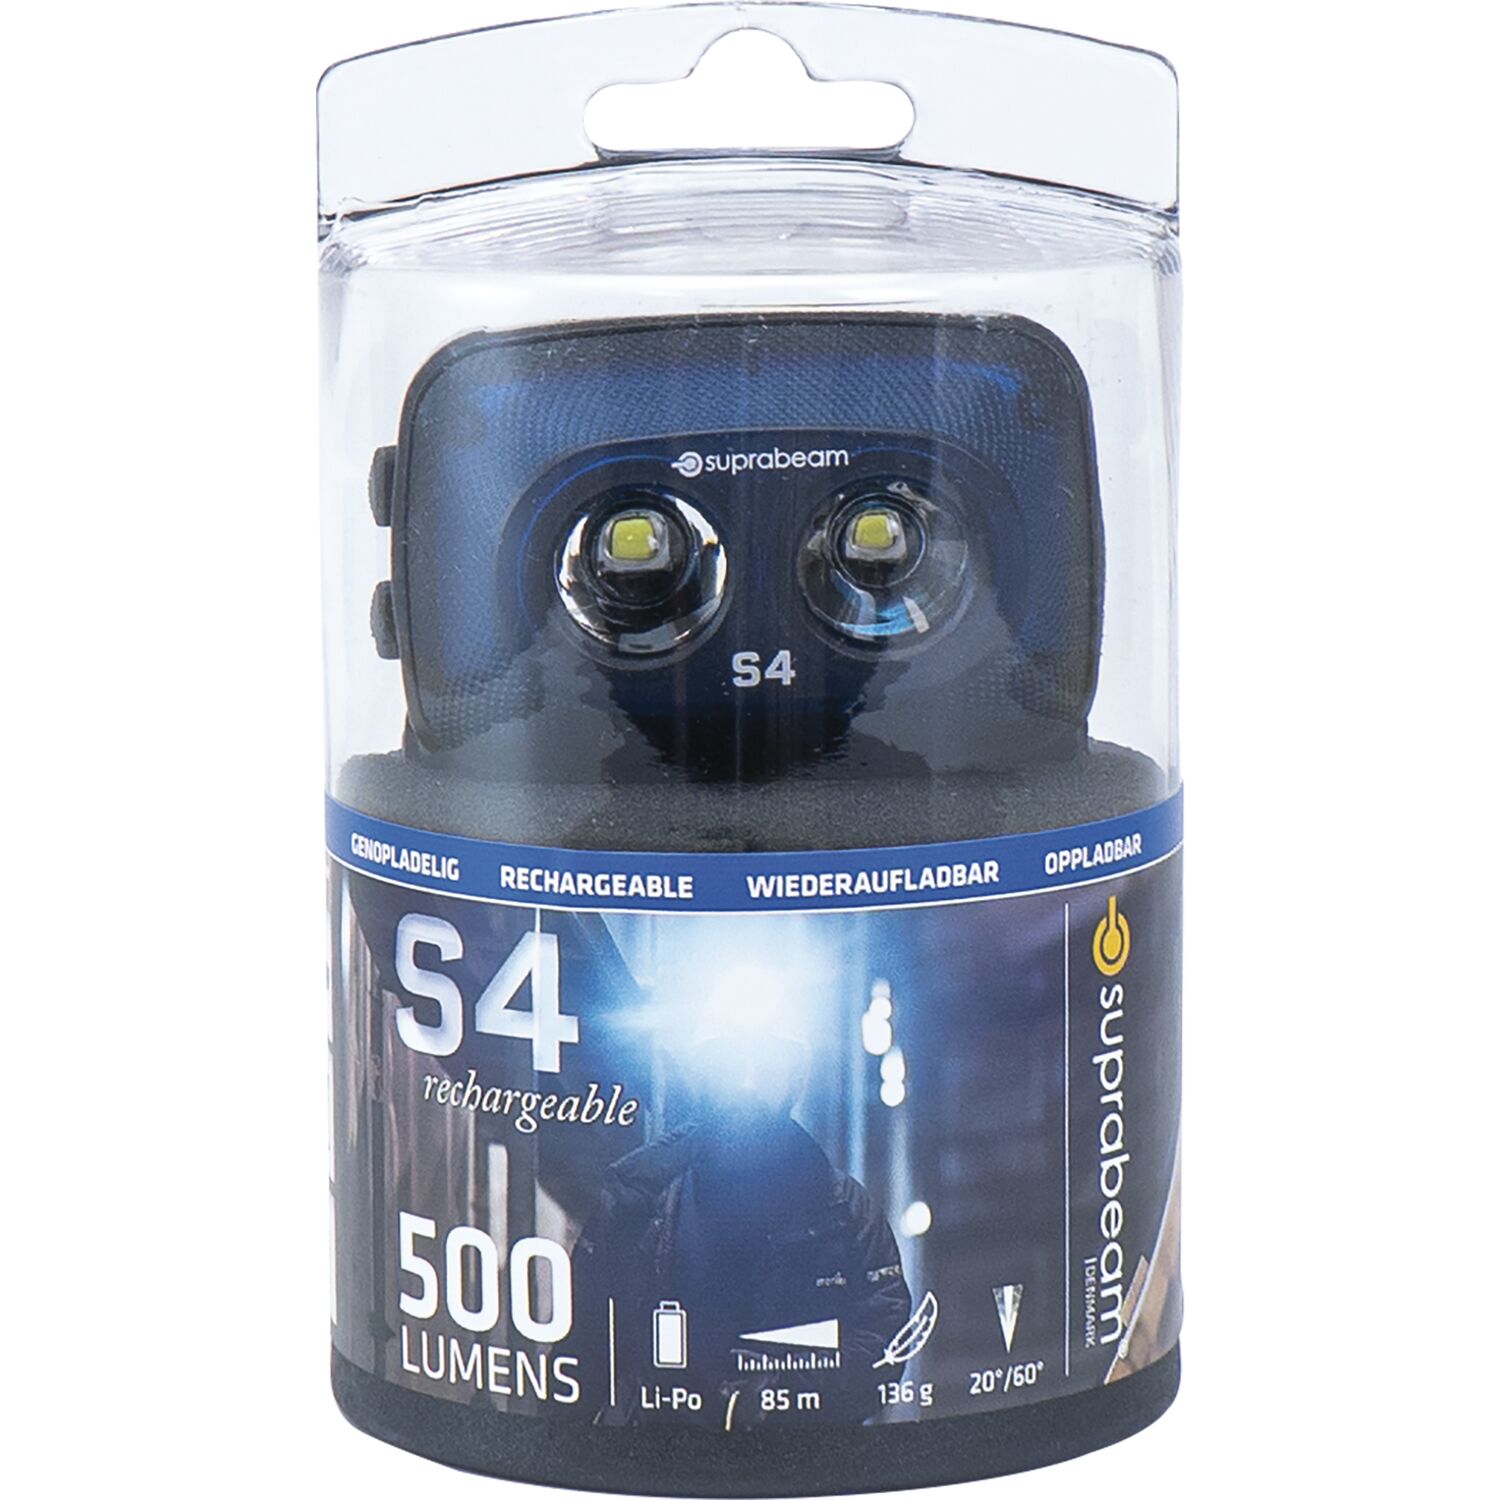 SUPRABEAM Stirnlampe S4 rechargeable LED 500 Lumen IP68